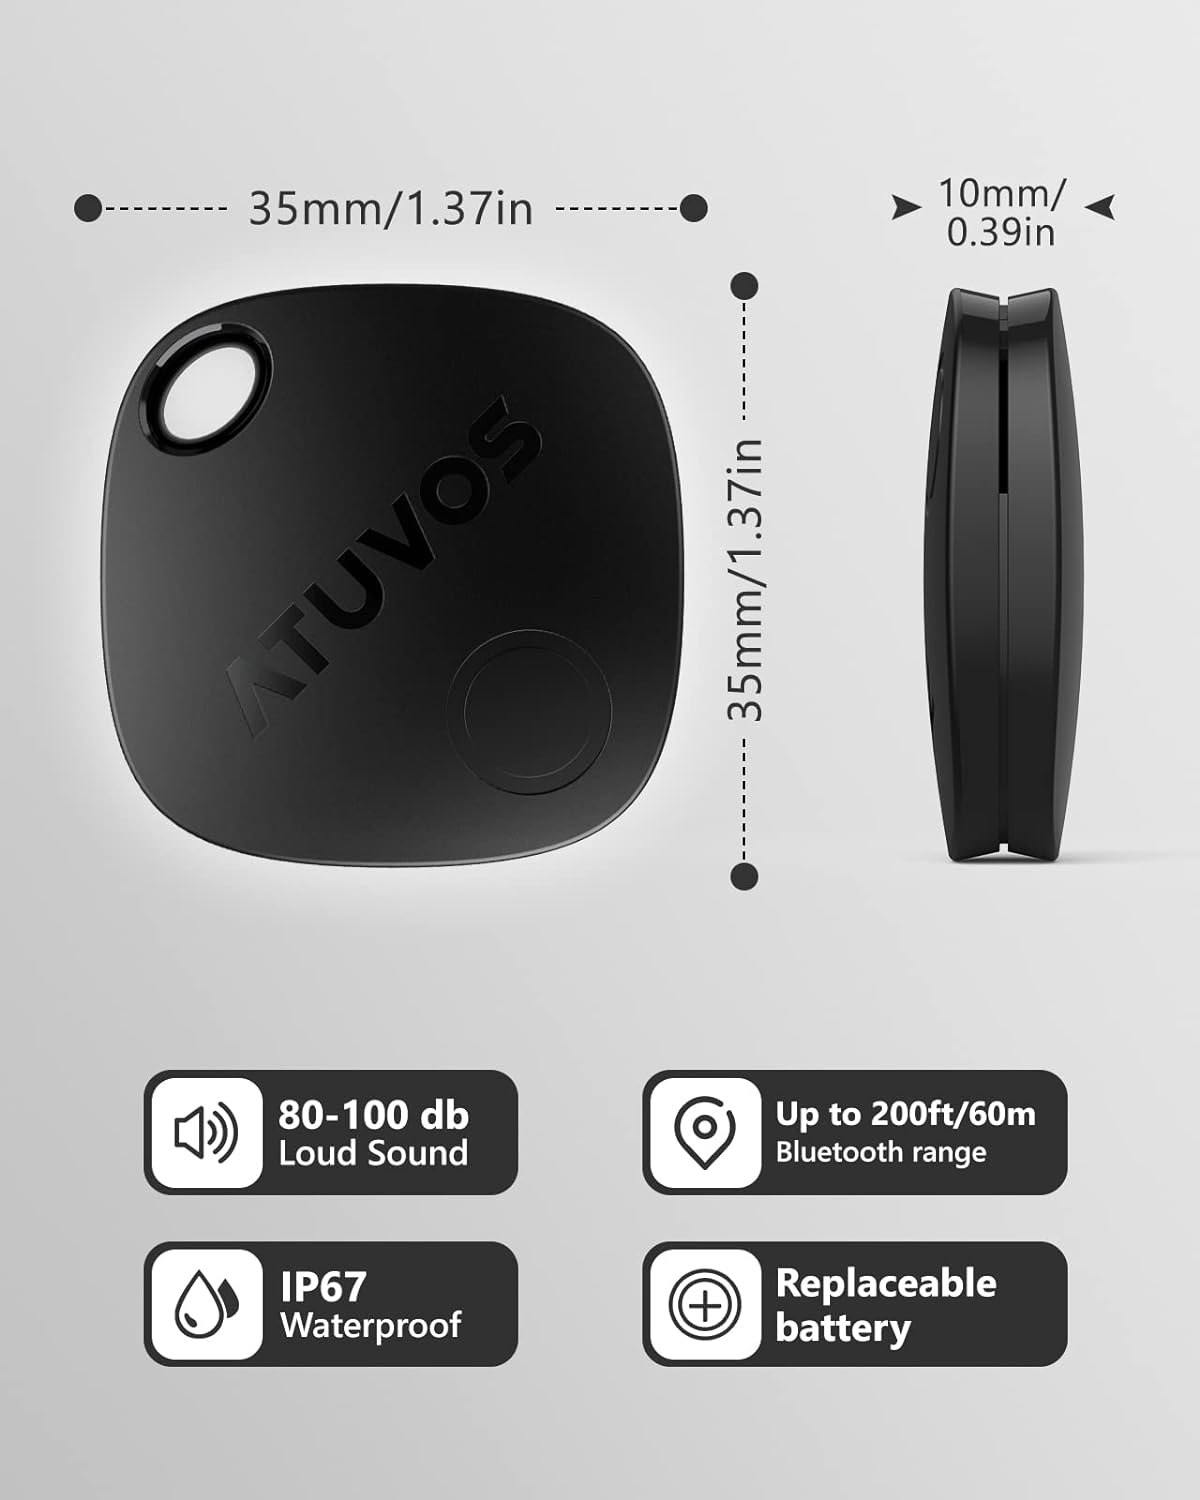 ATUVOS Luggage Trackers for Suitcase, Bluetooth Tracker Works with Apple Find My (iOS only), IP67 Waterproof, Privacy Protection, Lost Mode, Item Locator for, Bags, and More 1 Pack Black